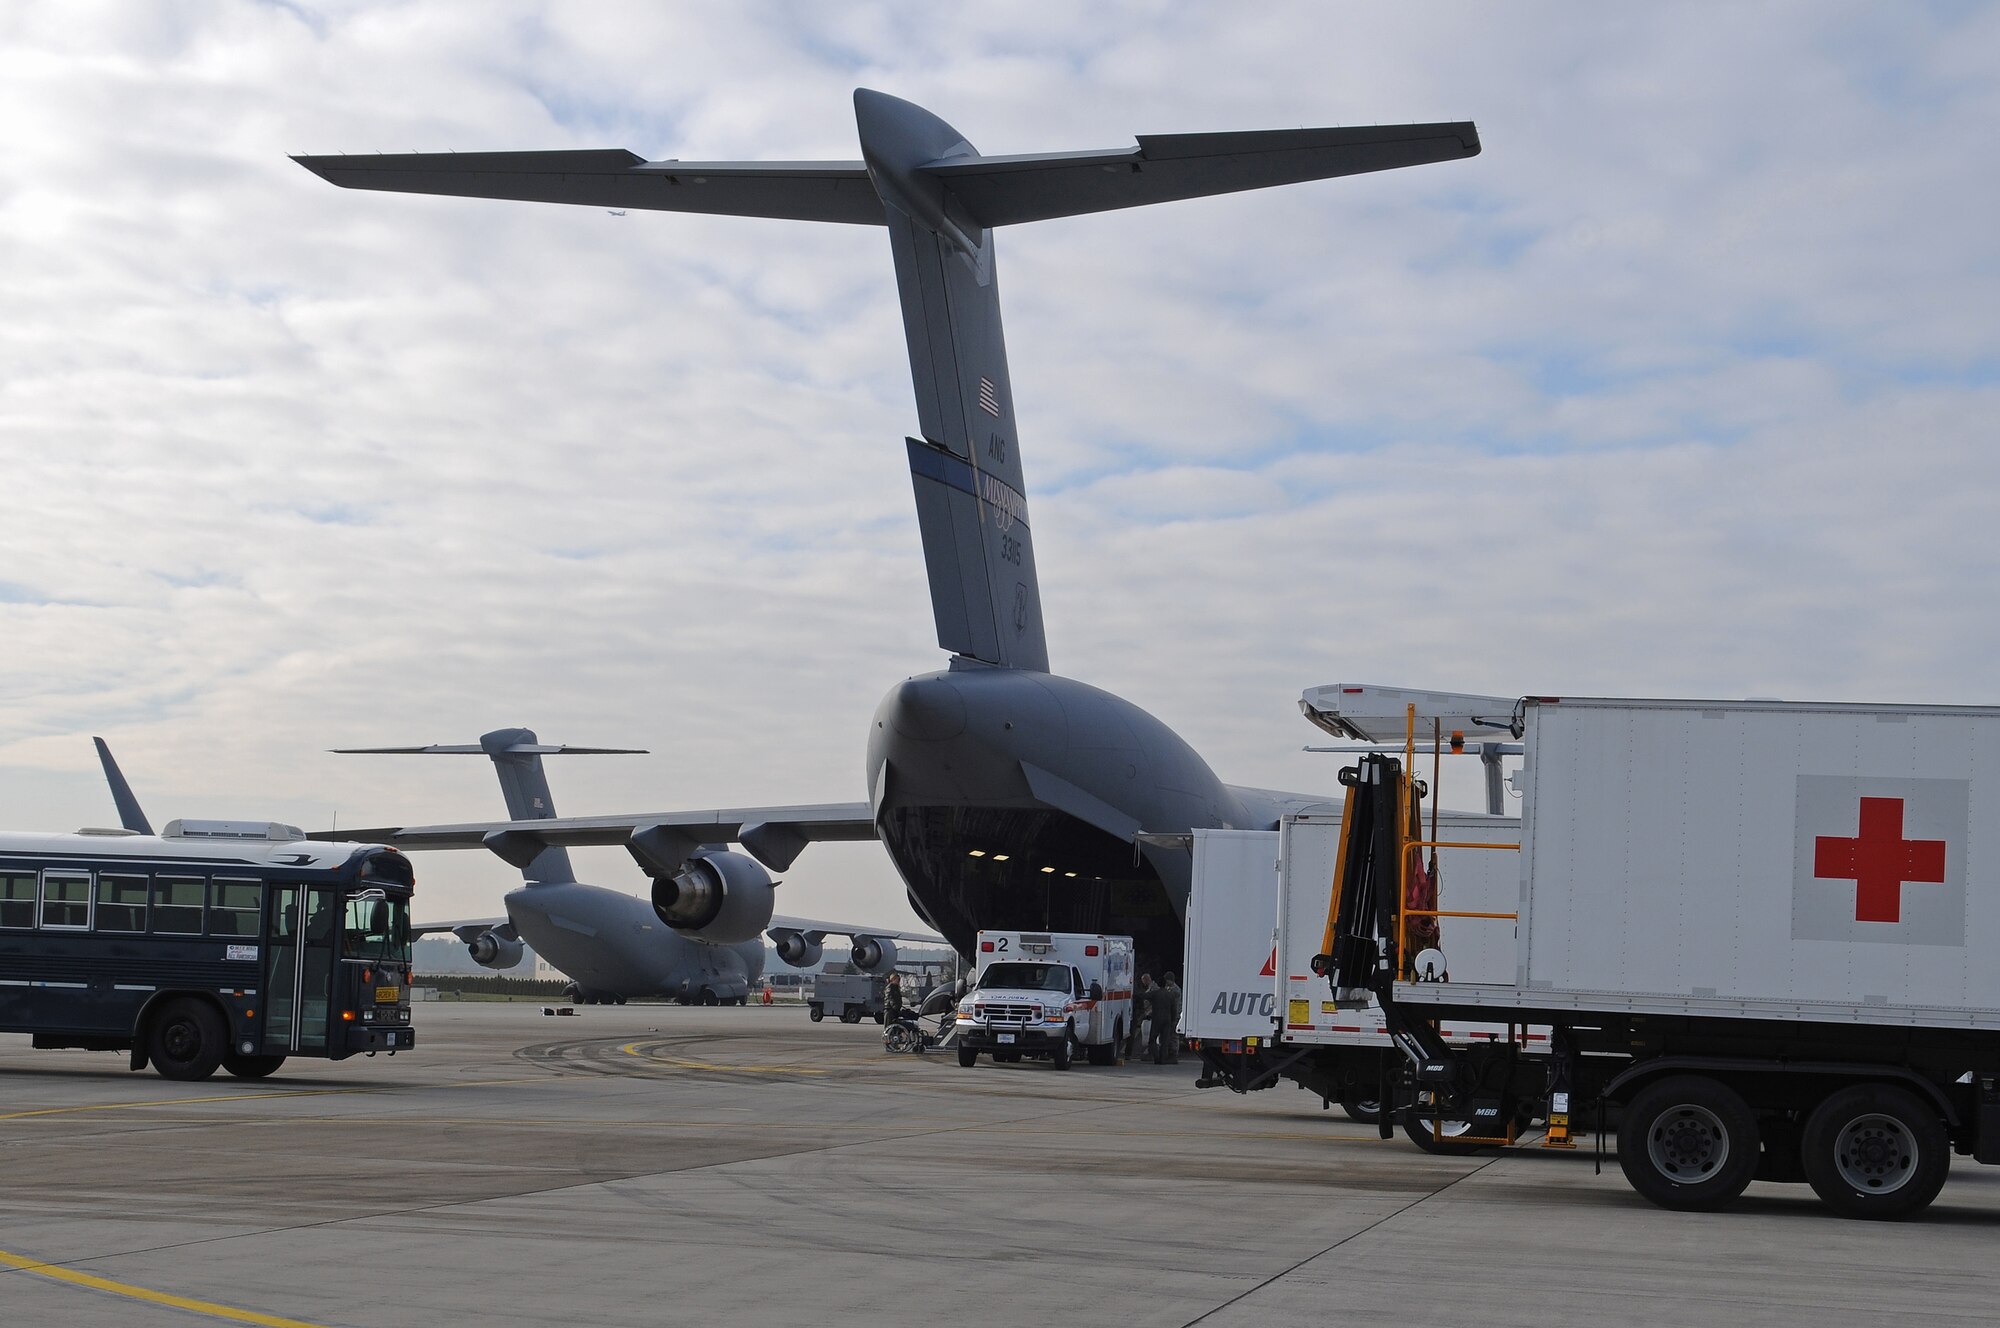 Airmen unload medical supplies from a C-17 Globemaster III, Ramstein Air Base, Germany, Nov. 27, 2008. The C-17 arrived from Andrew Air Force Base, Maryland. (U.S. Air Force photo by Airman 1st Class Grovert Fuentes-Contreras)